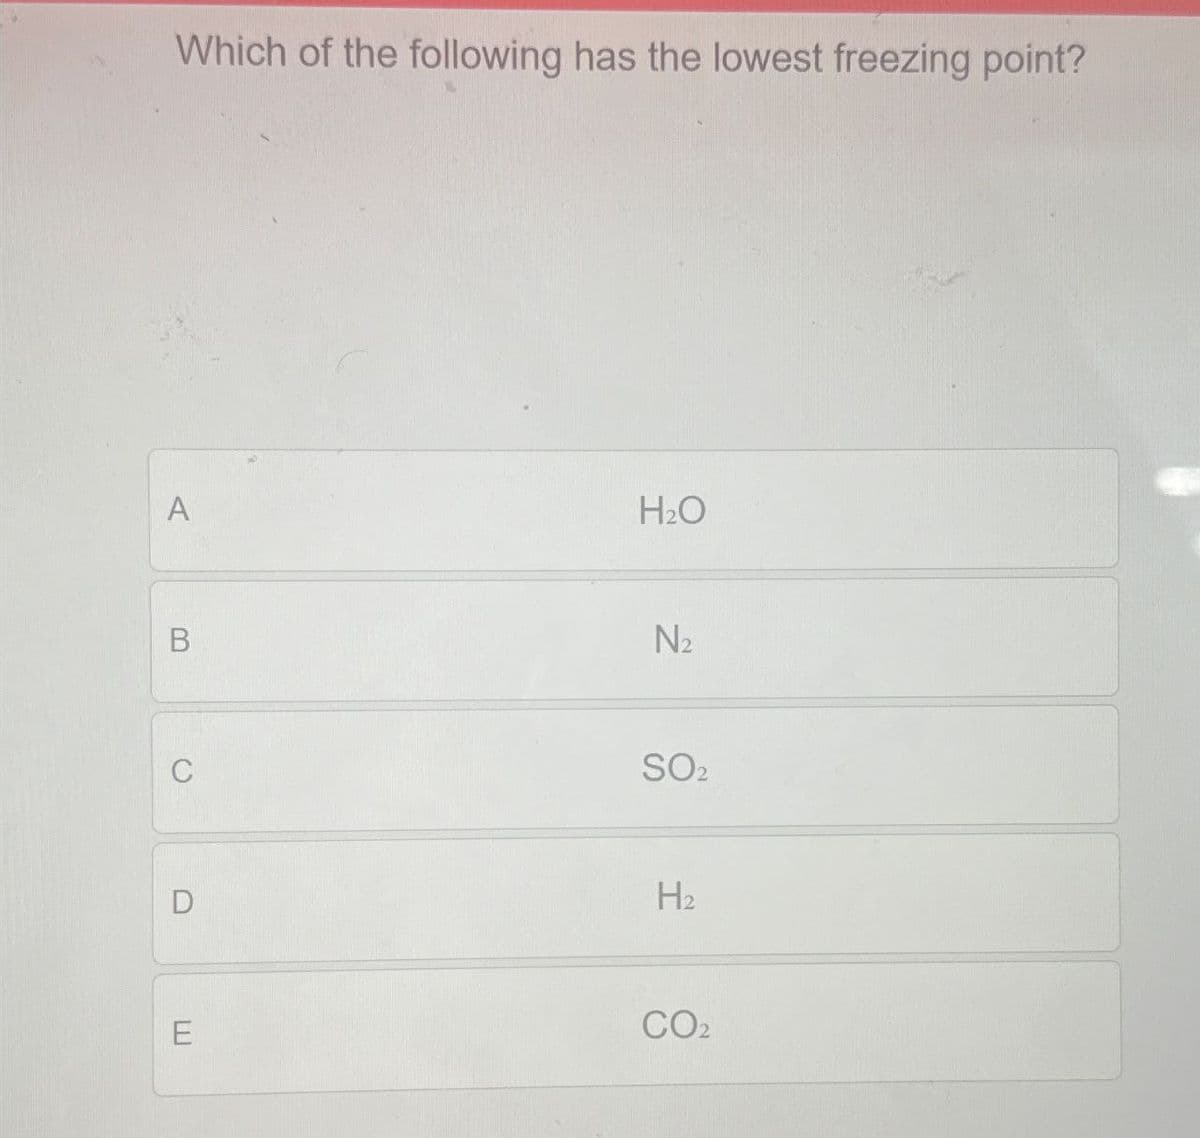 Which of the following has the lowest freezing point?
A
B
C
H₂O
N₂
SO2
D
H2
E
CO2